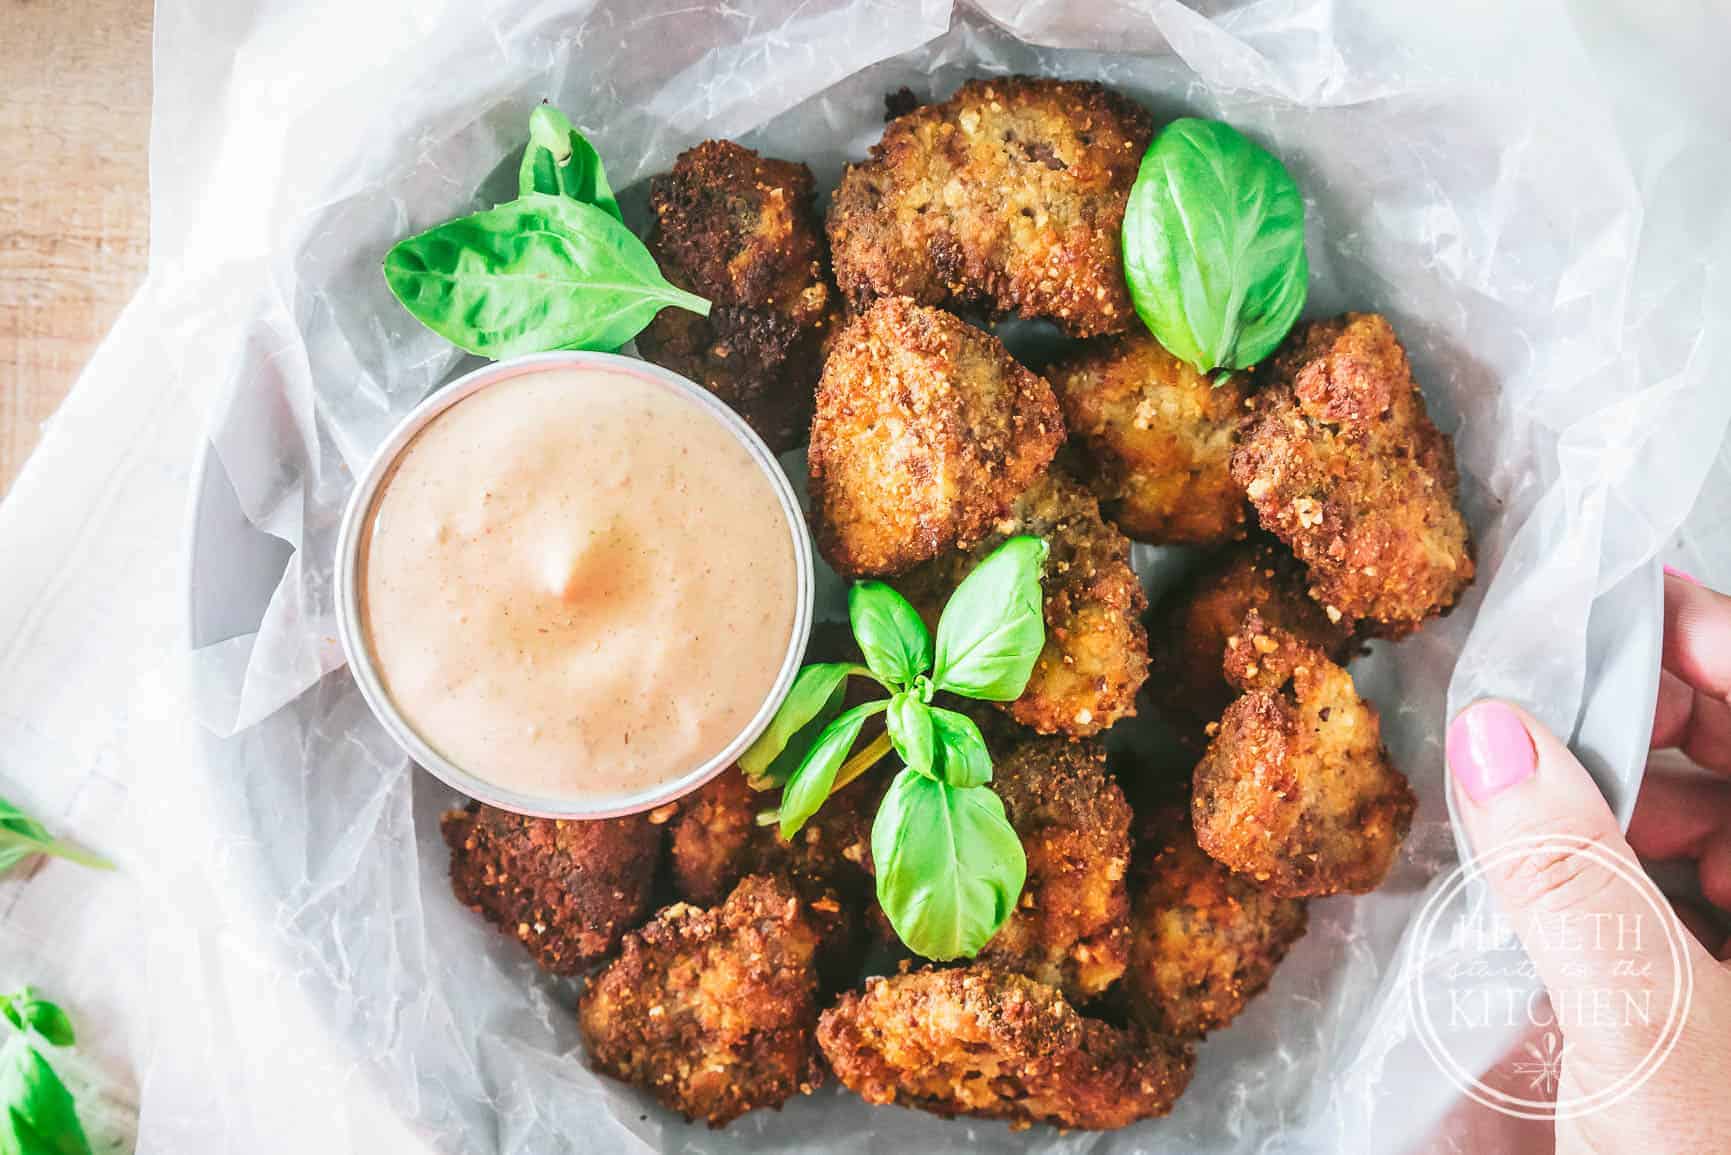 Keto Steak Nuggets with Chipotle Ranch Dip 